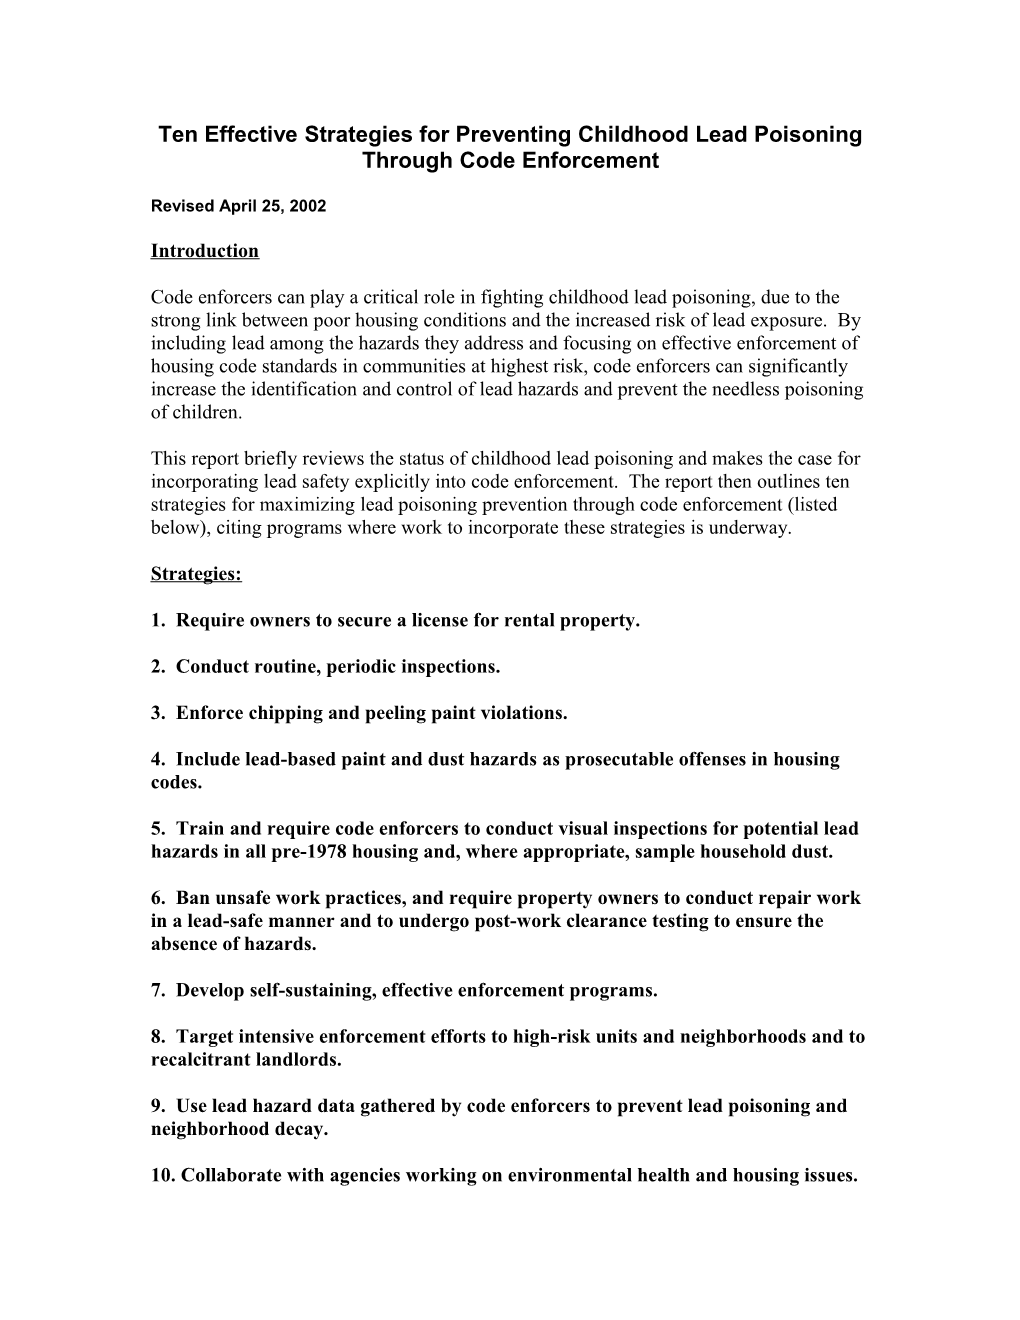 Ten Effective Strategies for Preventing Childhood Lead Poisoning Through Code Enforcement